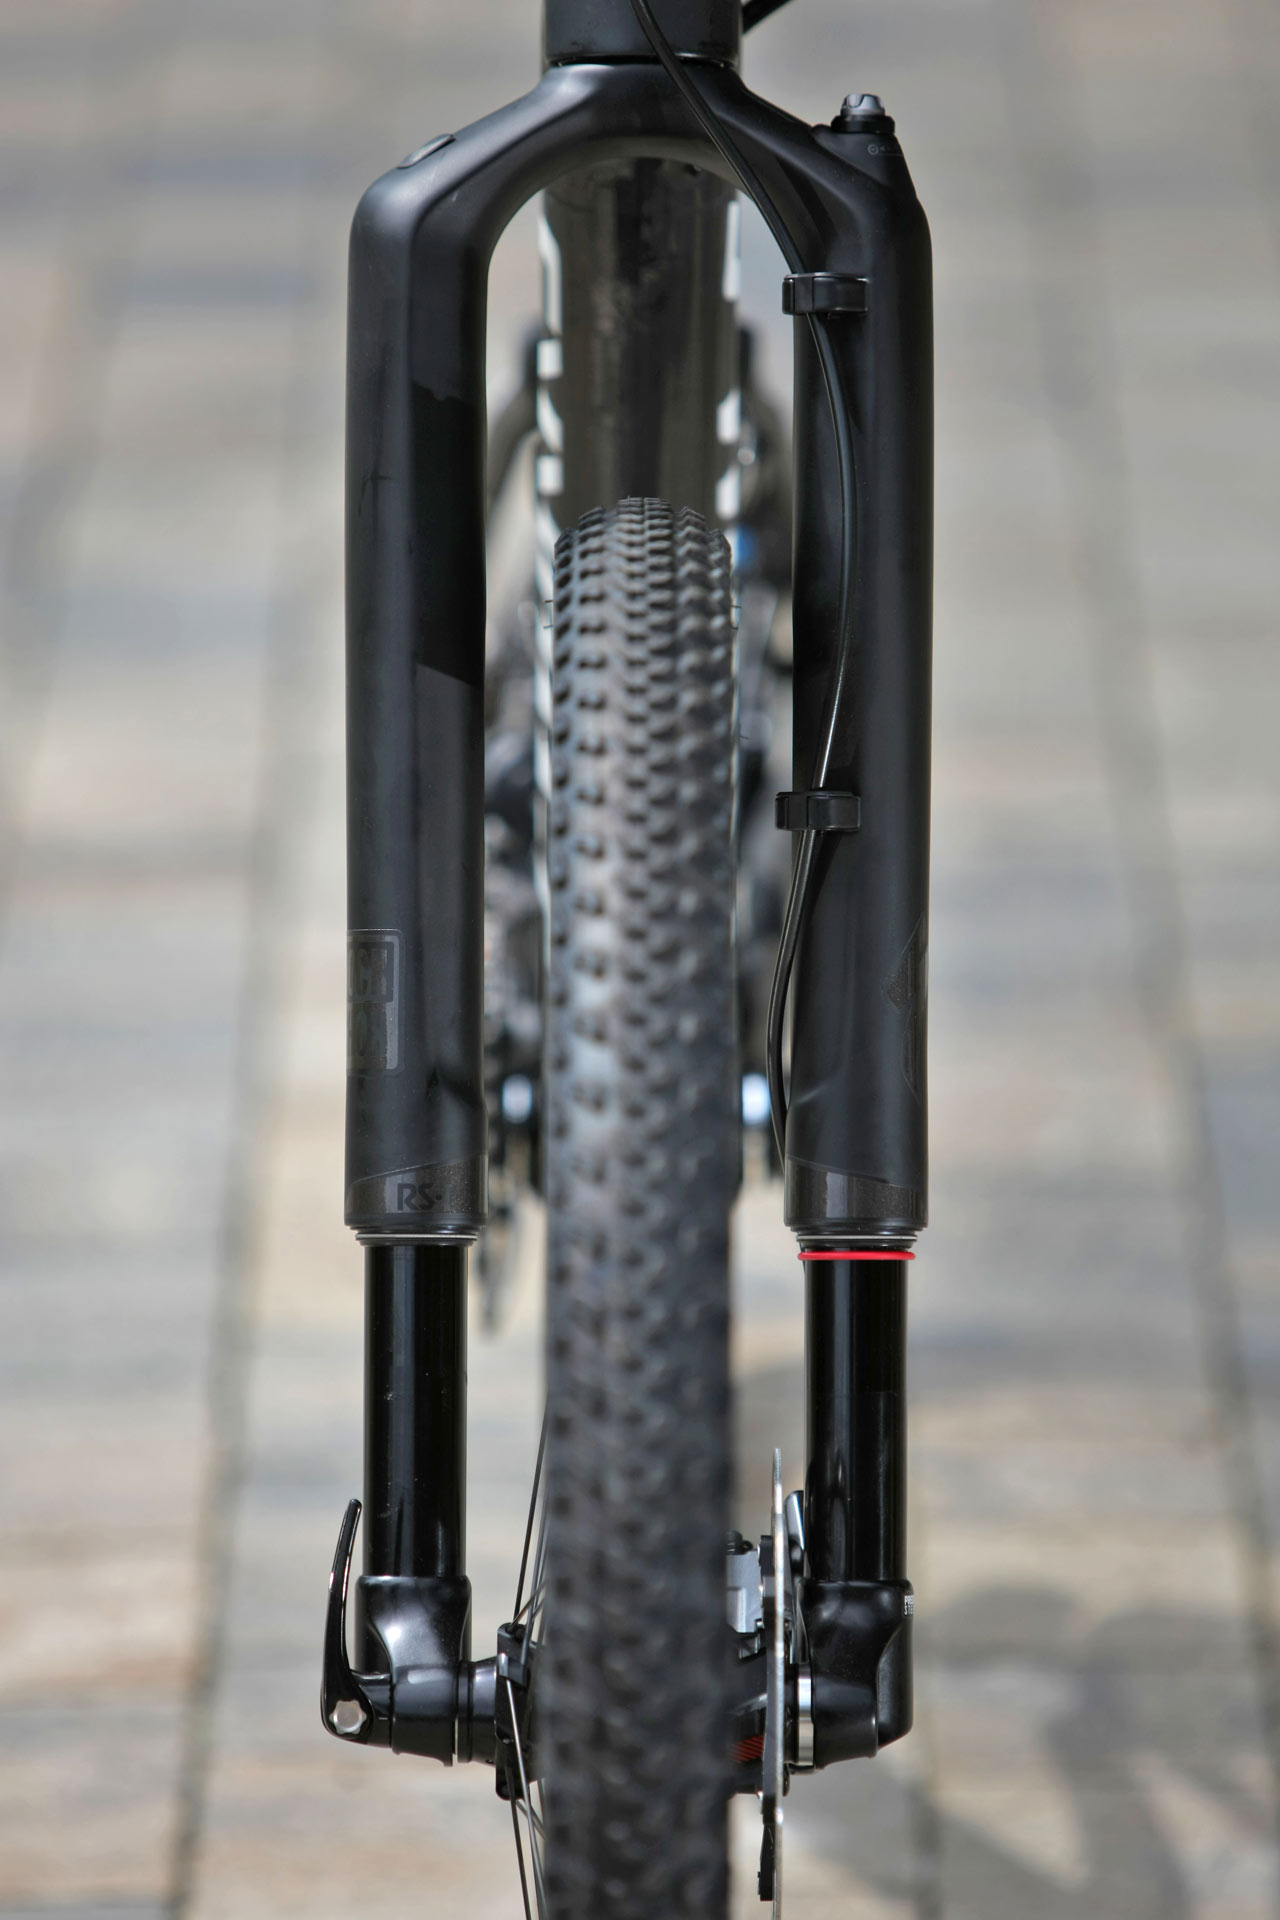 Specialized S-Works Epic Di2